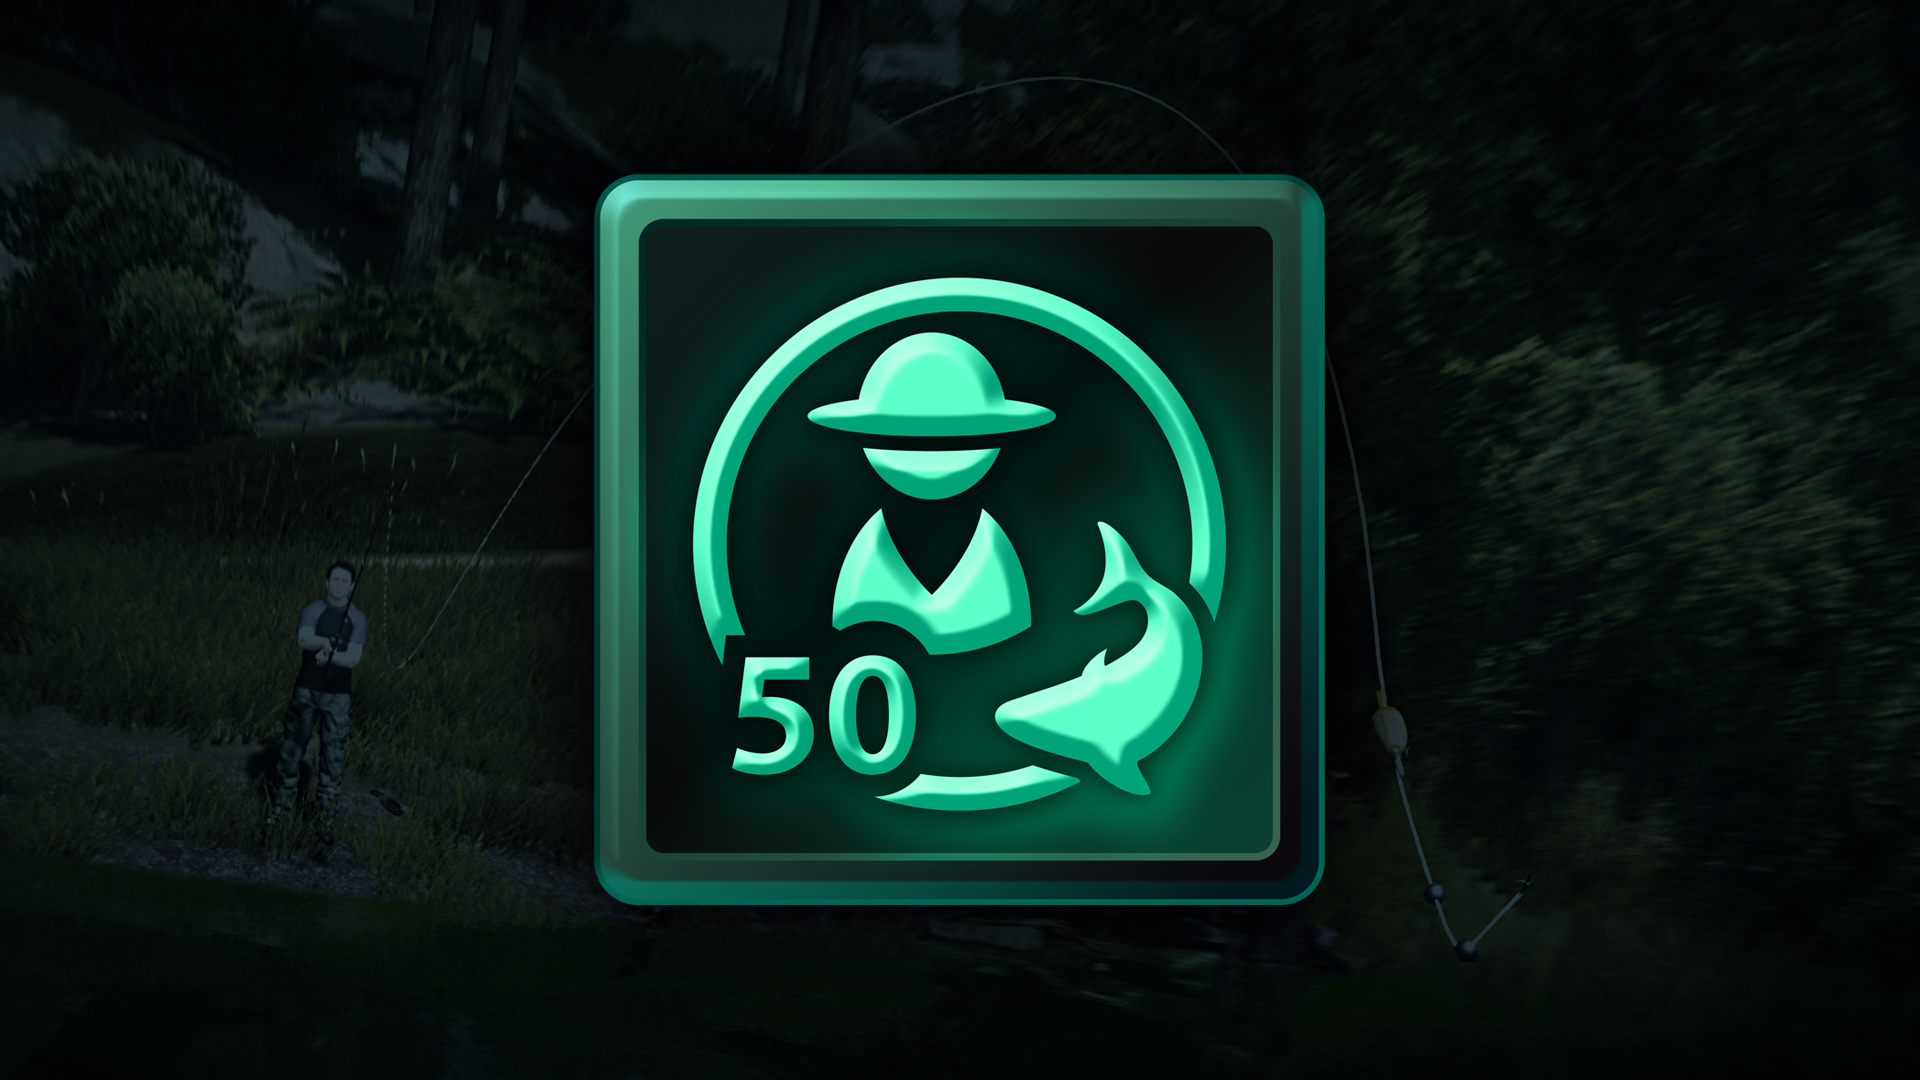 Icon for Bass expert